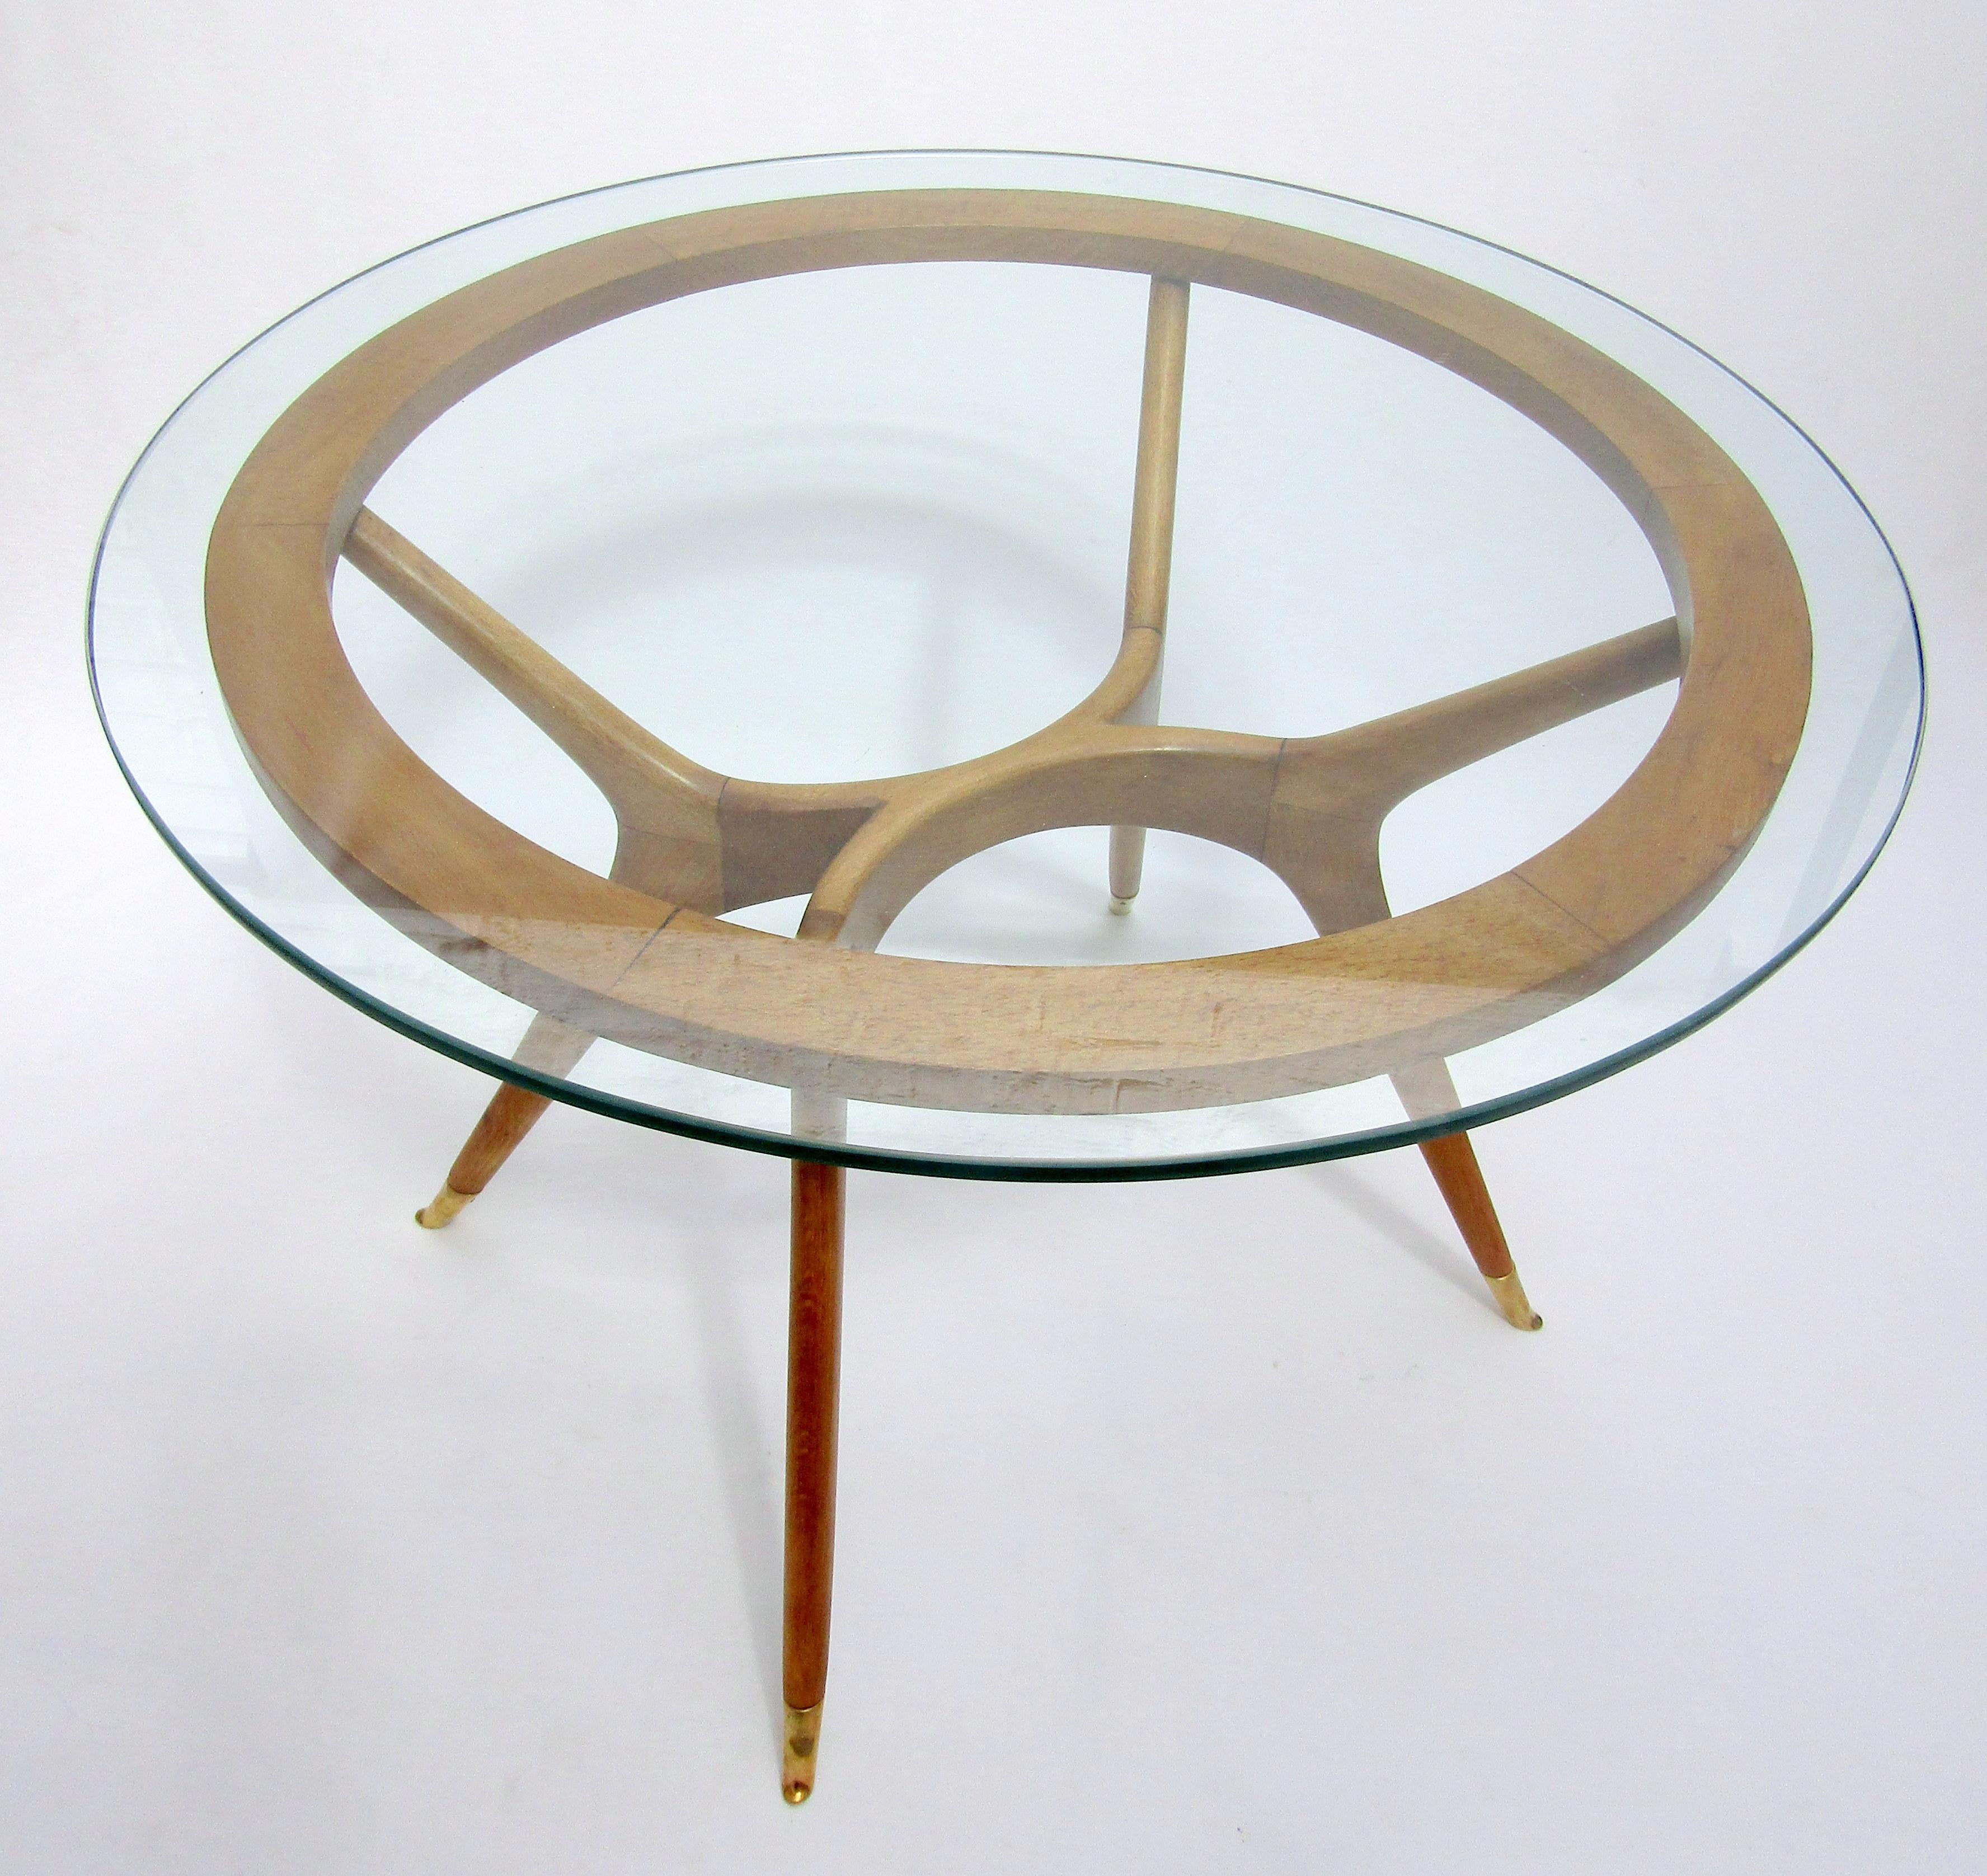 A circular wood and glass side table with
brass sabots in the style of Ico Parisi
Italian, circa 1950.

Measures: Height 19 ¼ in / 49 cm
Diameter 27 ¼ in / 69 cm.